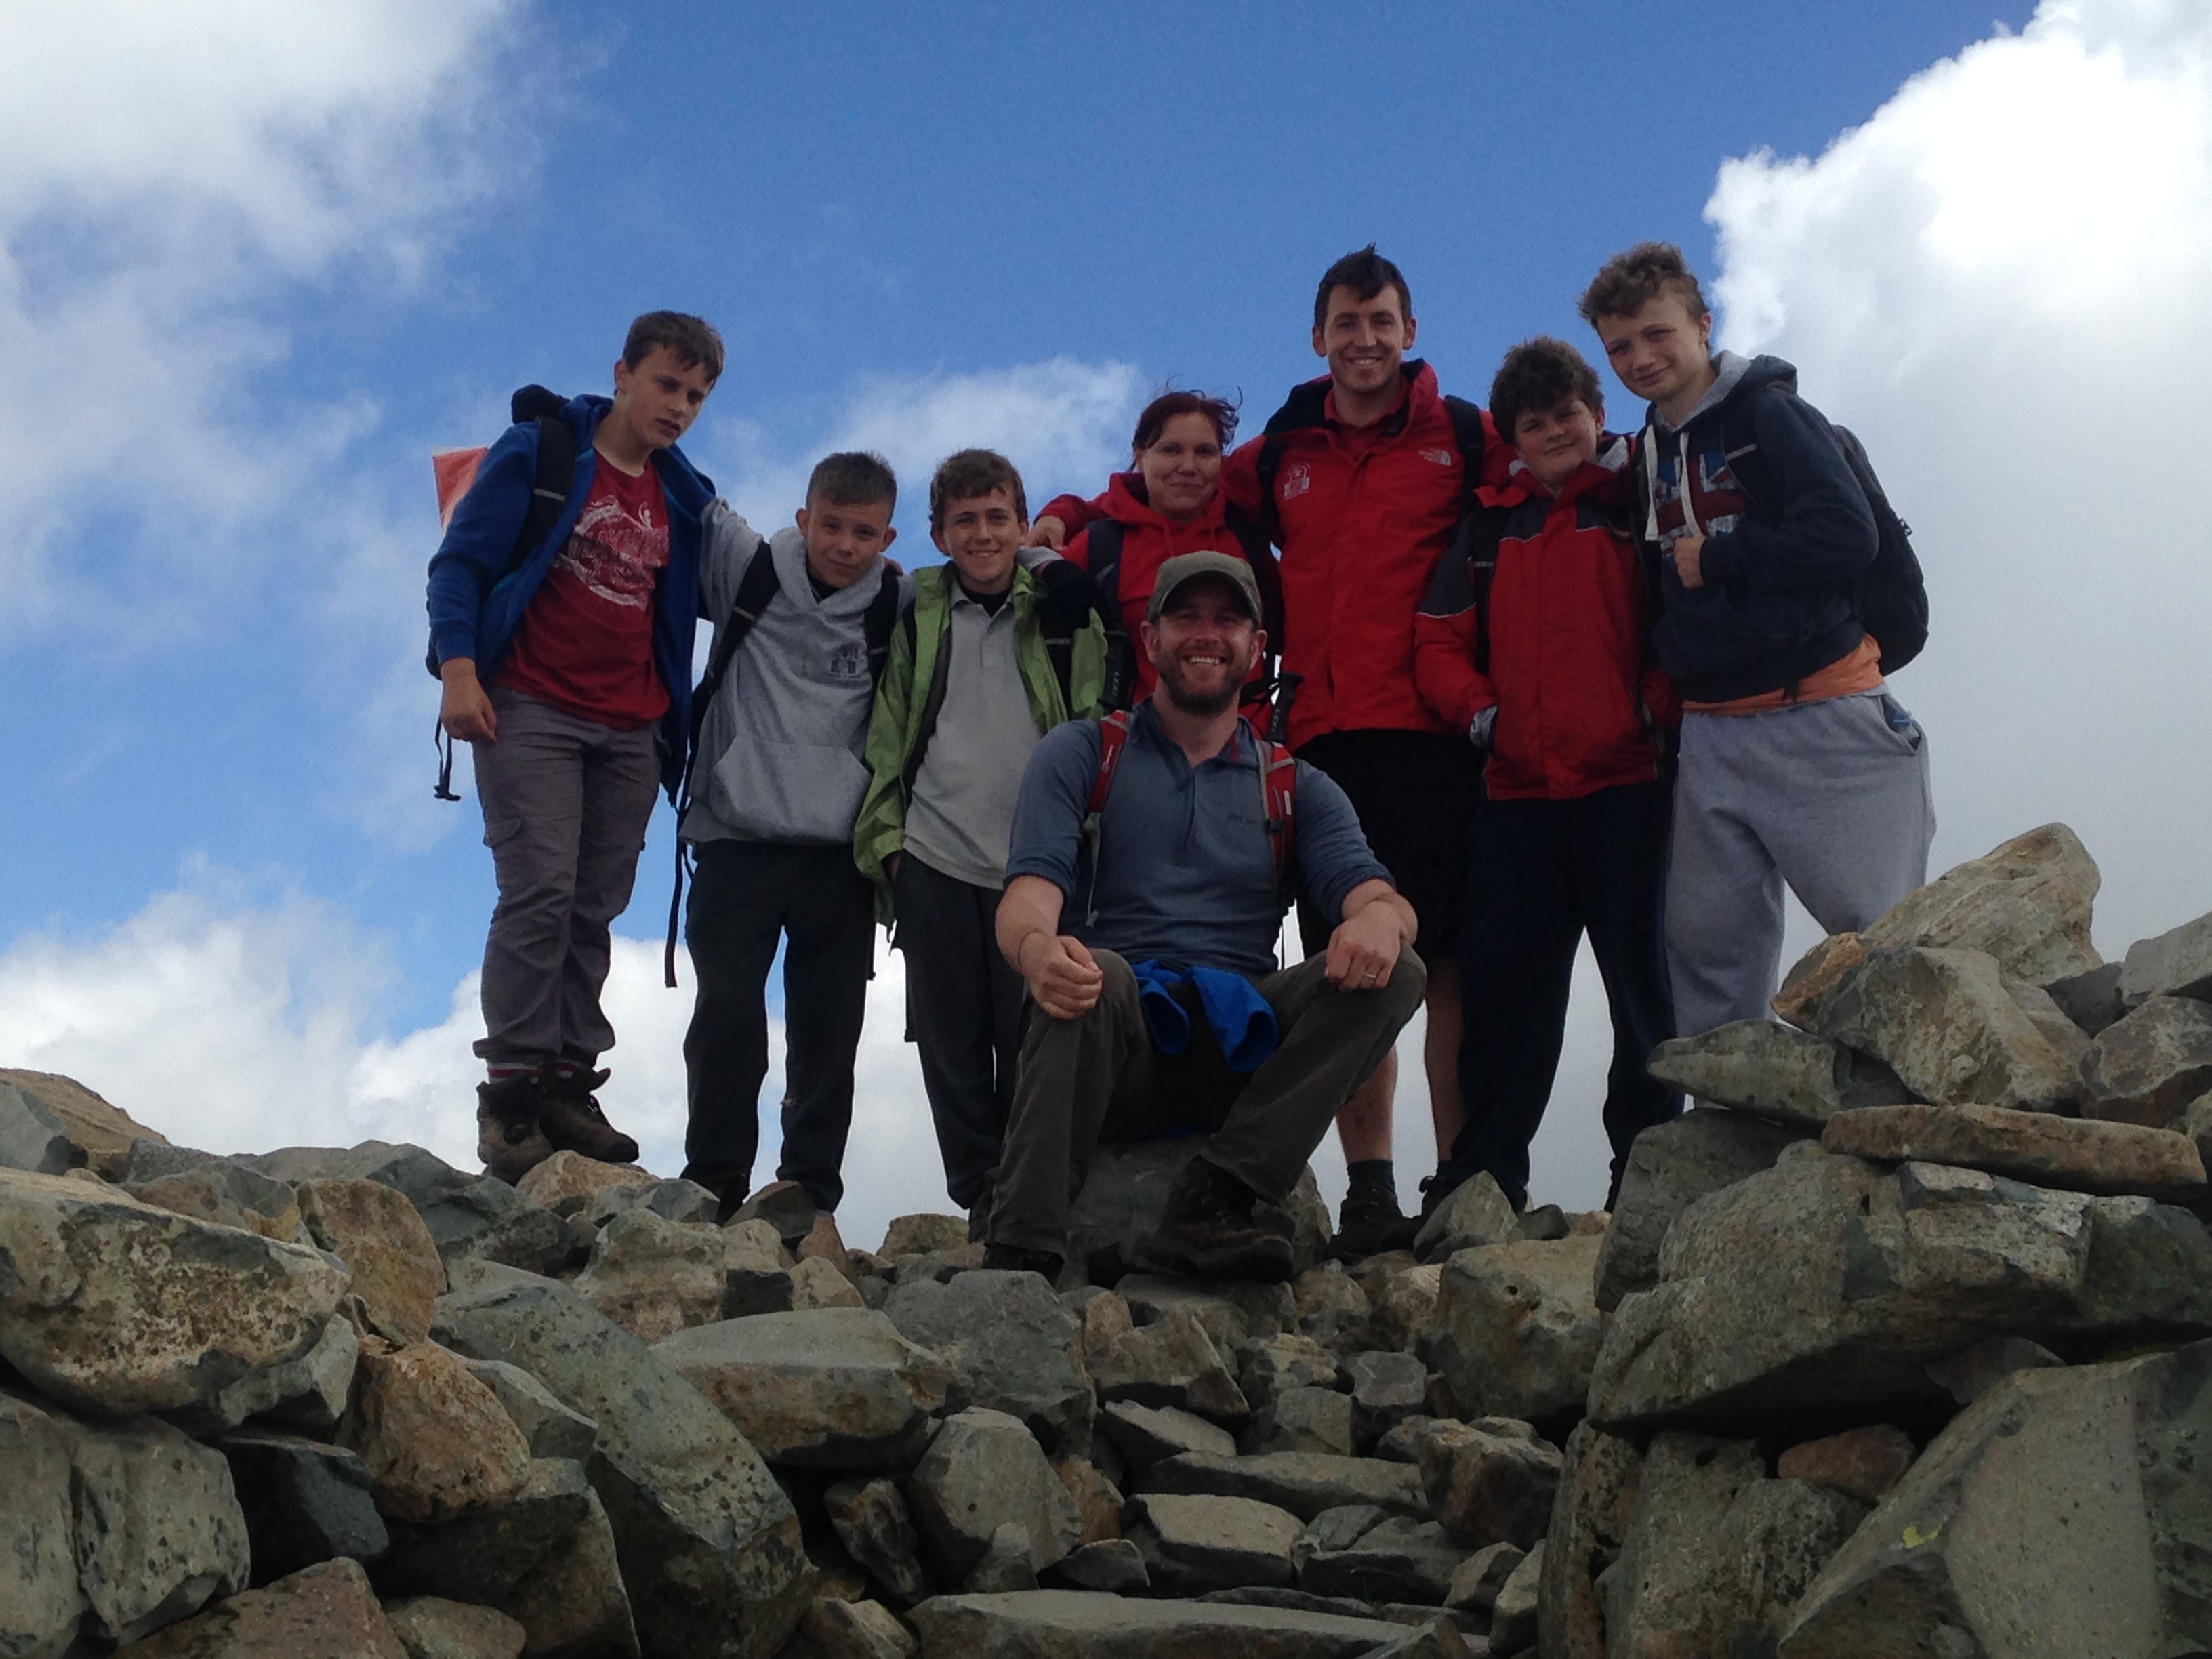 On top of Scafell Pike